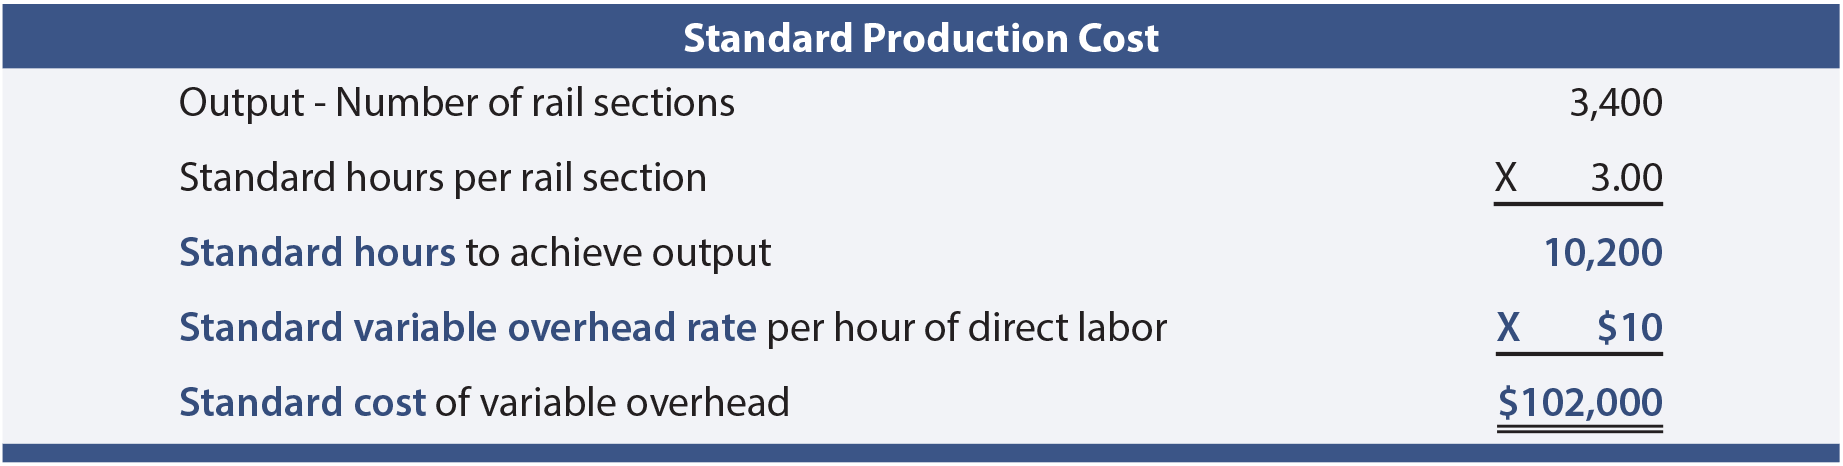 Standard Production Cost